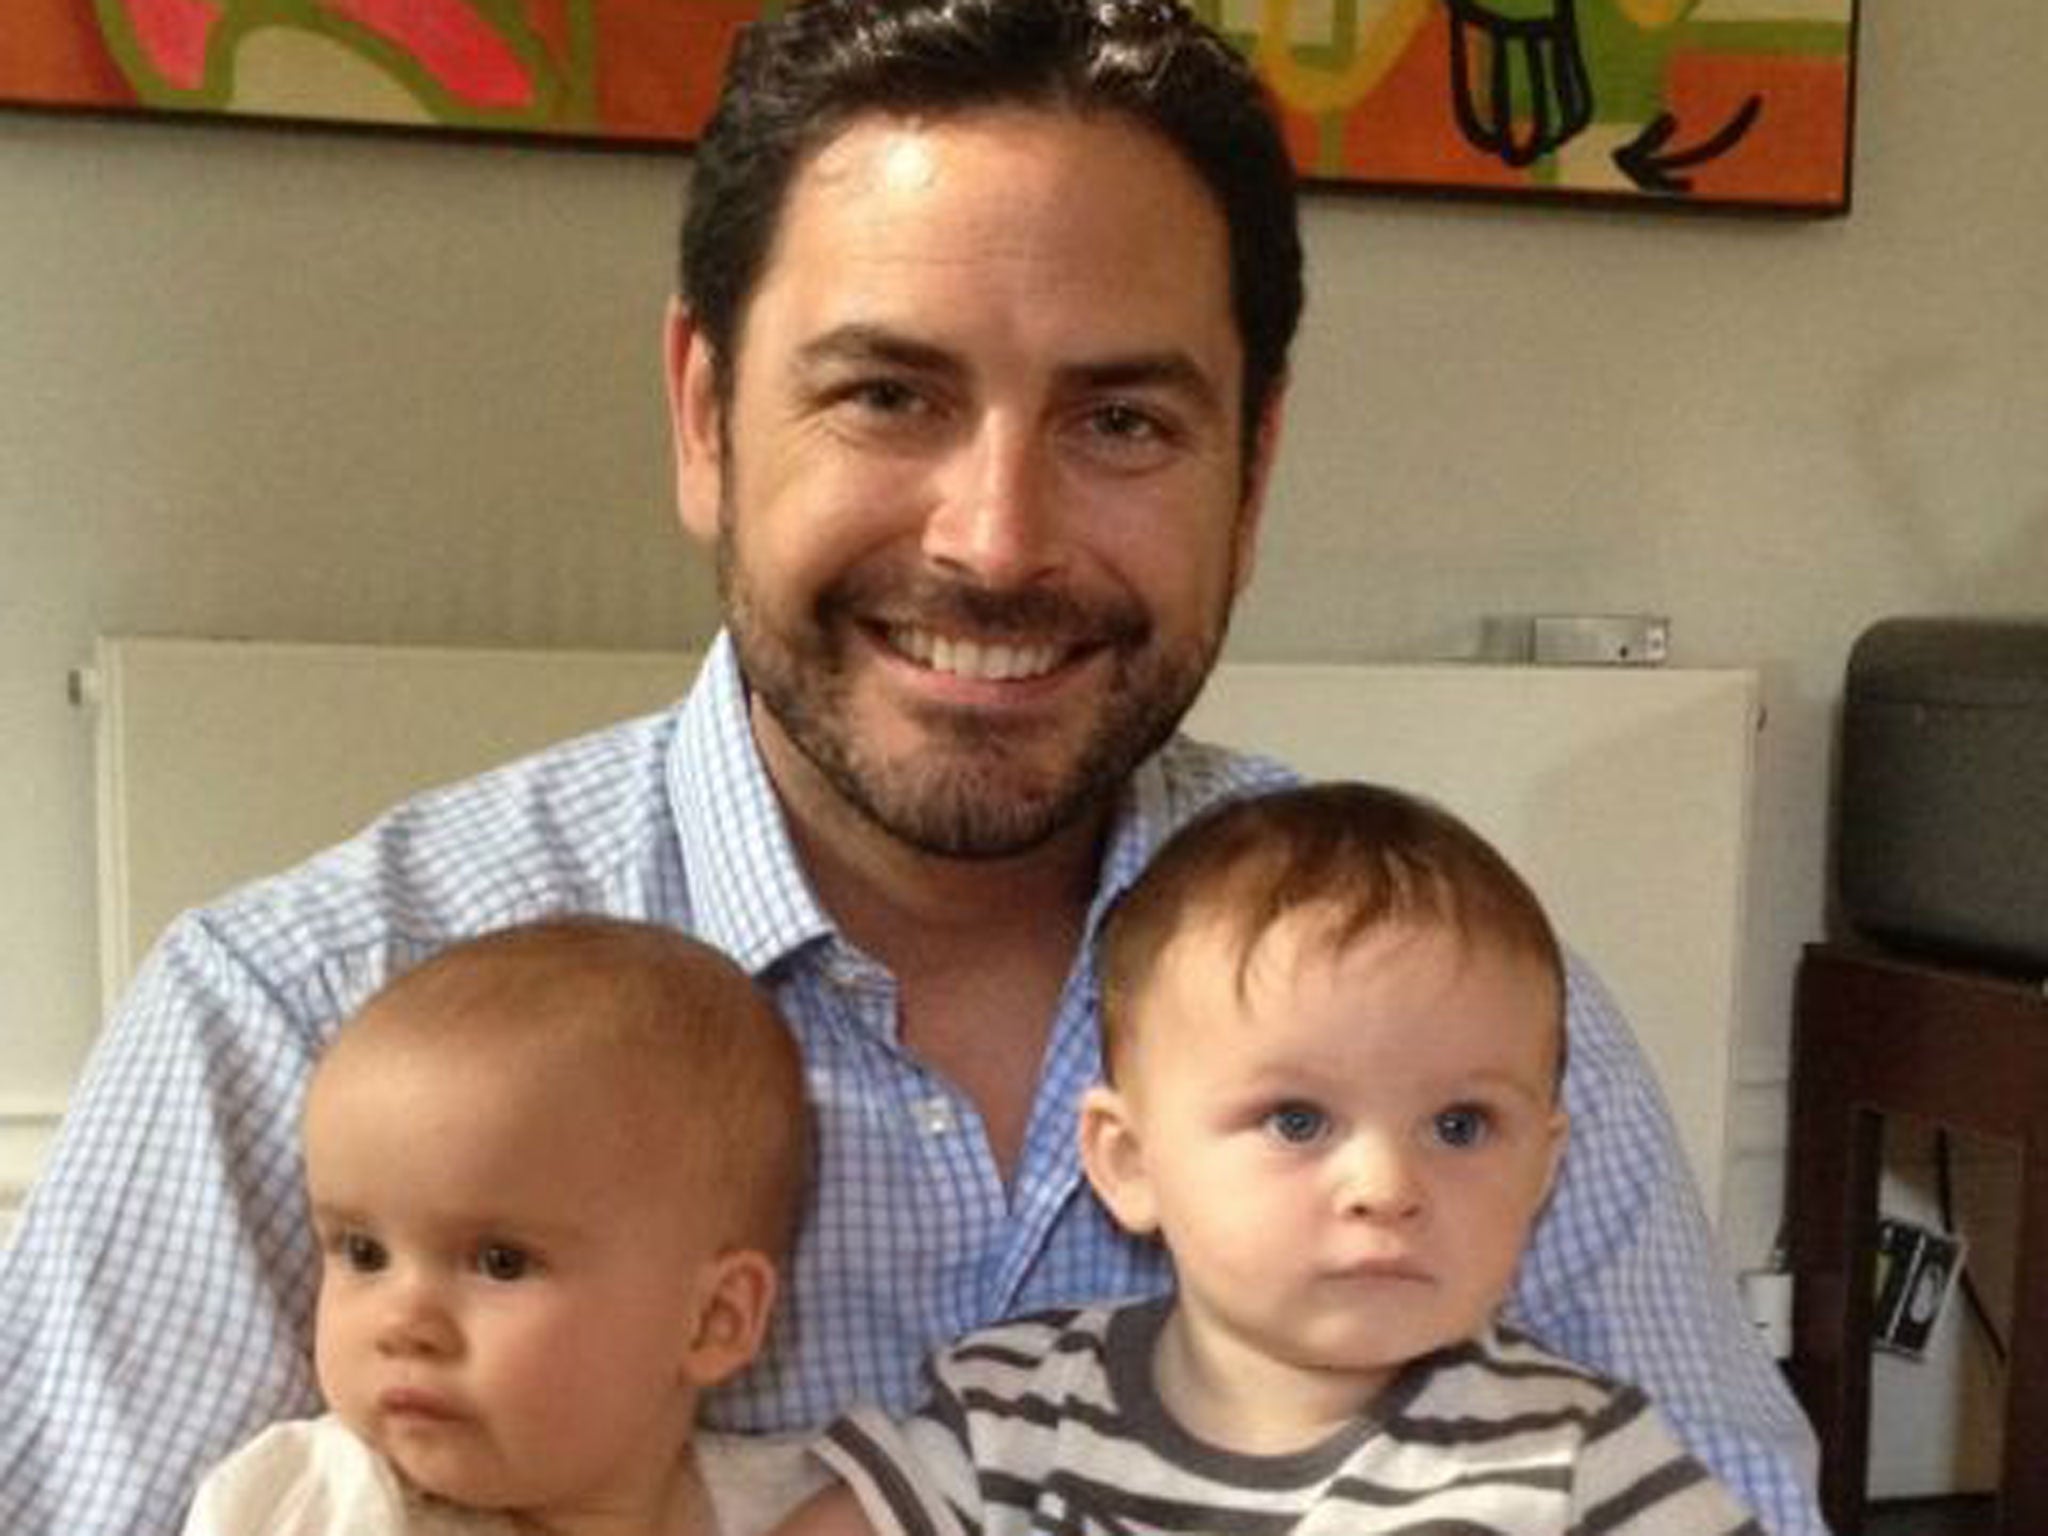 Richard Westoby with his twins Alexander and Liliana, who he had with his partner Stephen via a surrogate in America